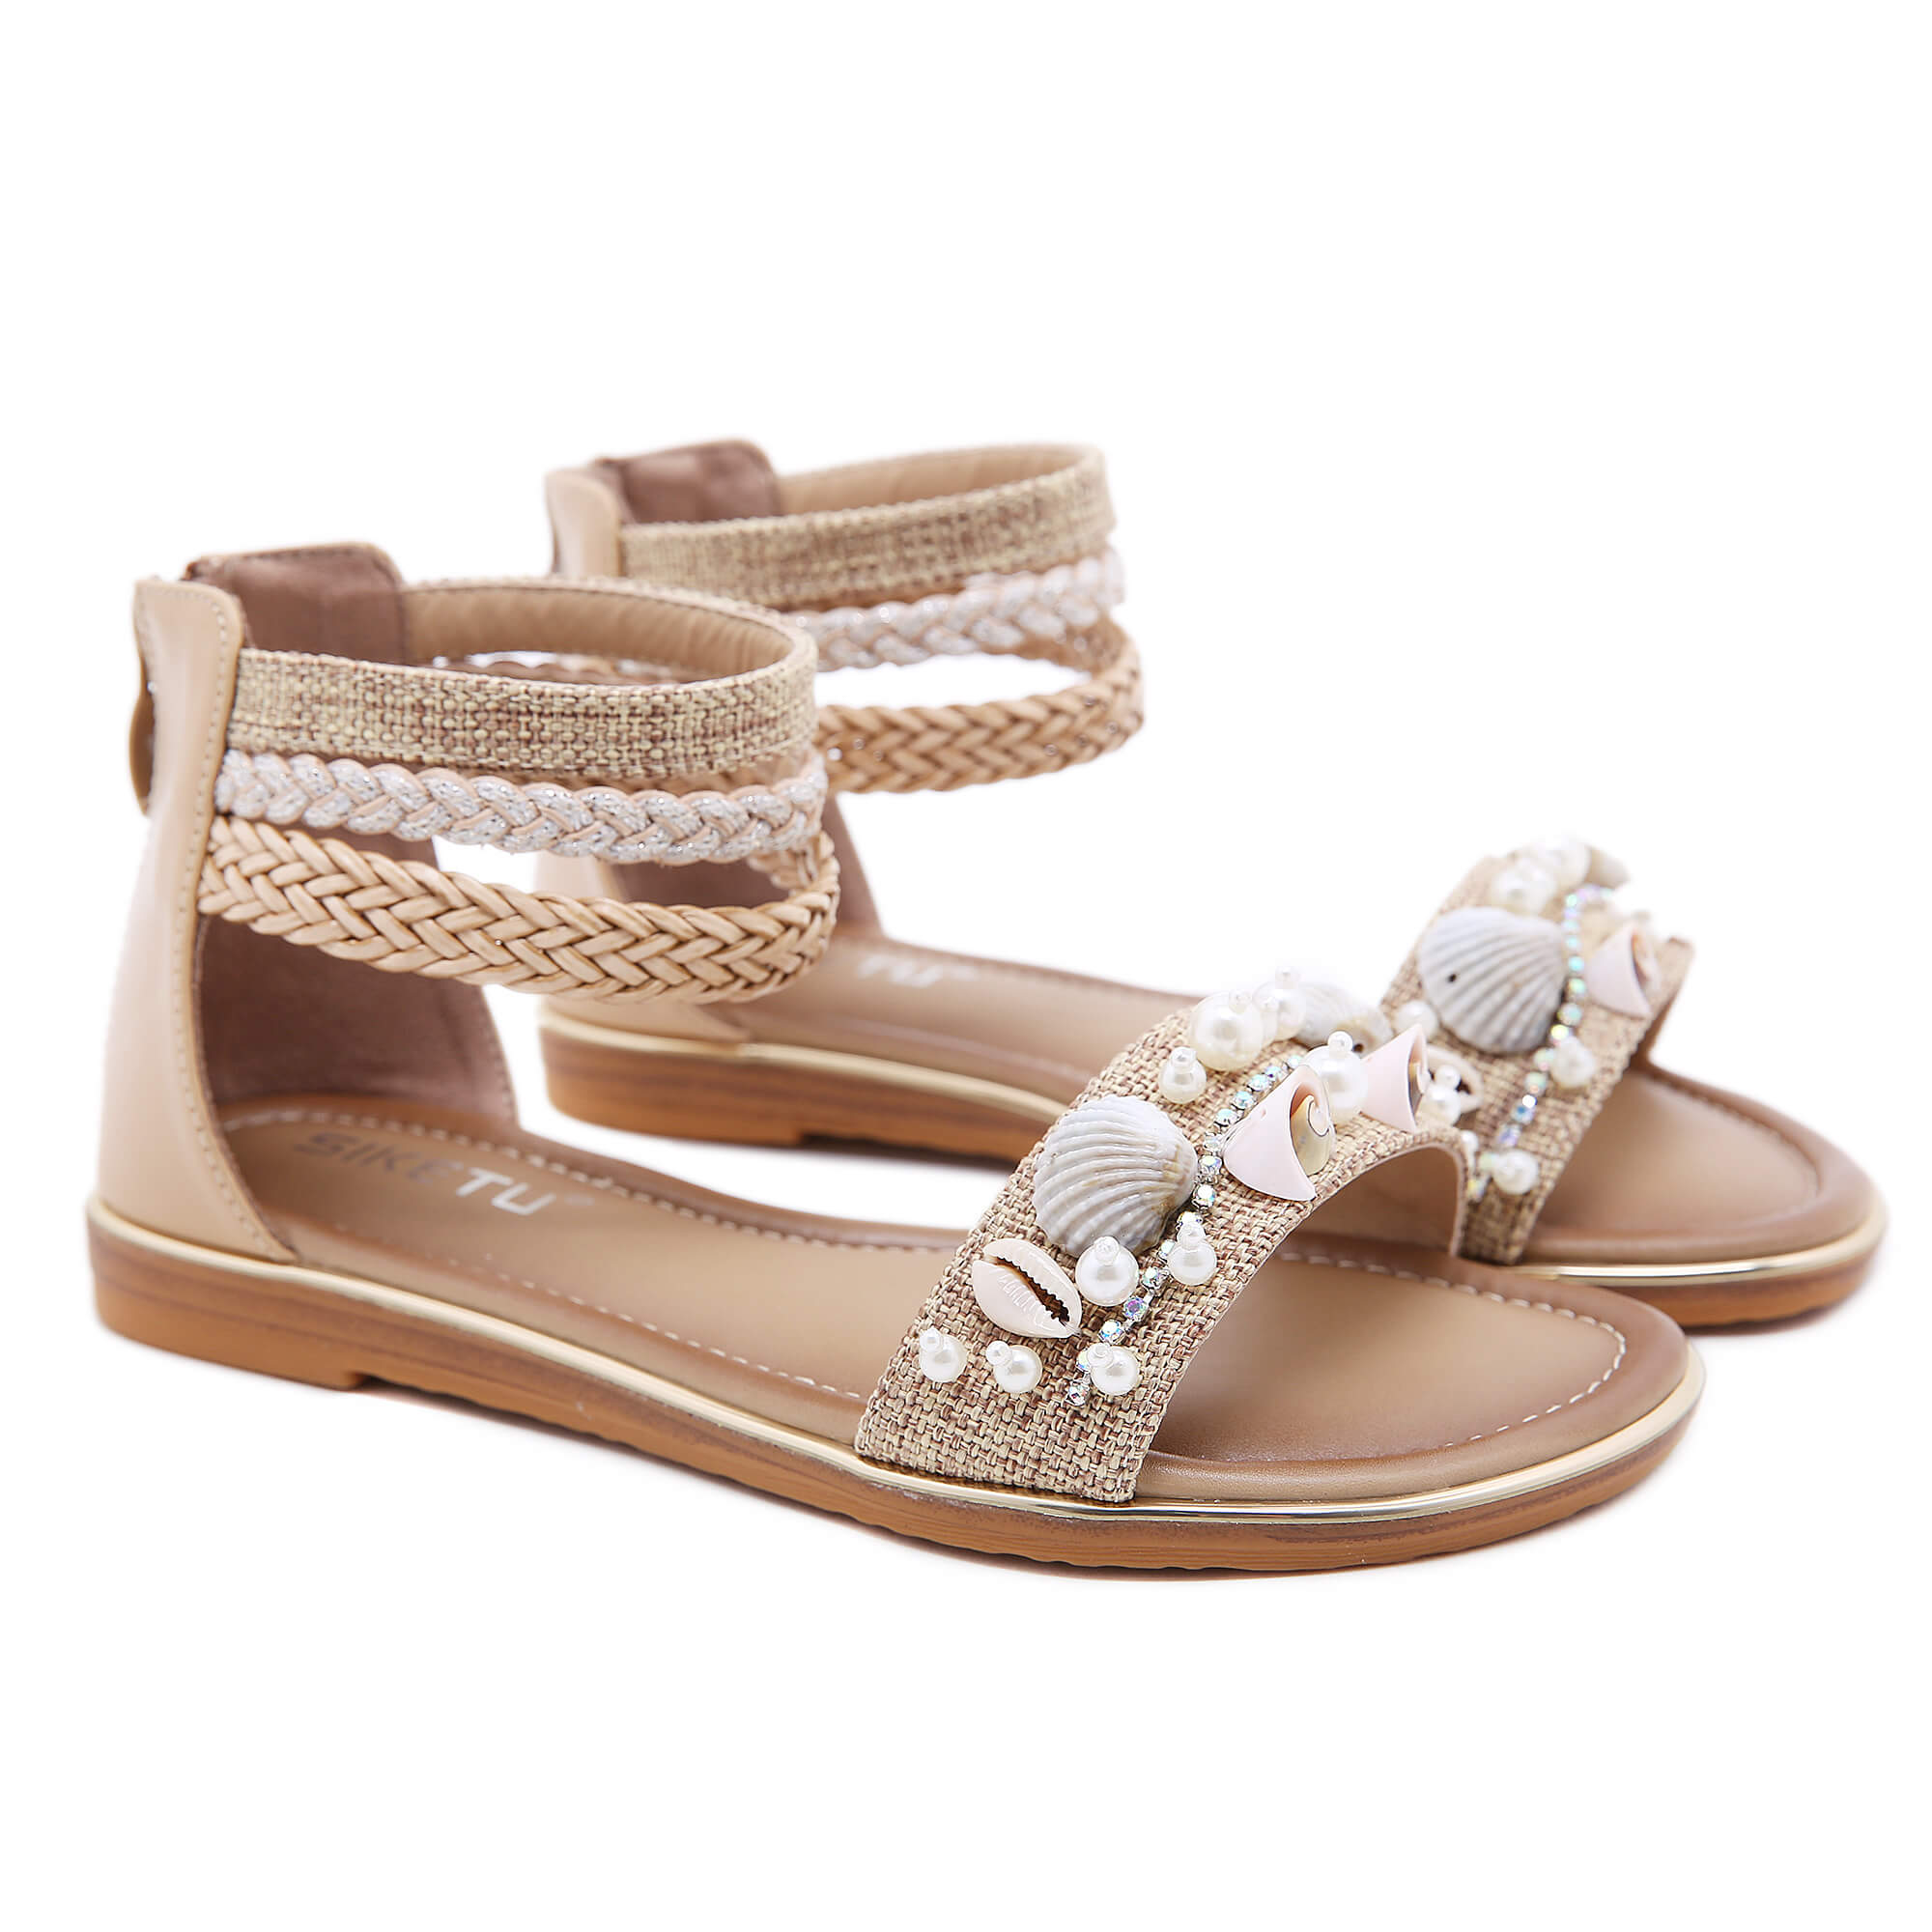 Shell & Conch Braided Ankle-Strap Sandal